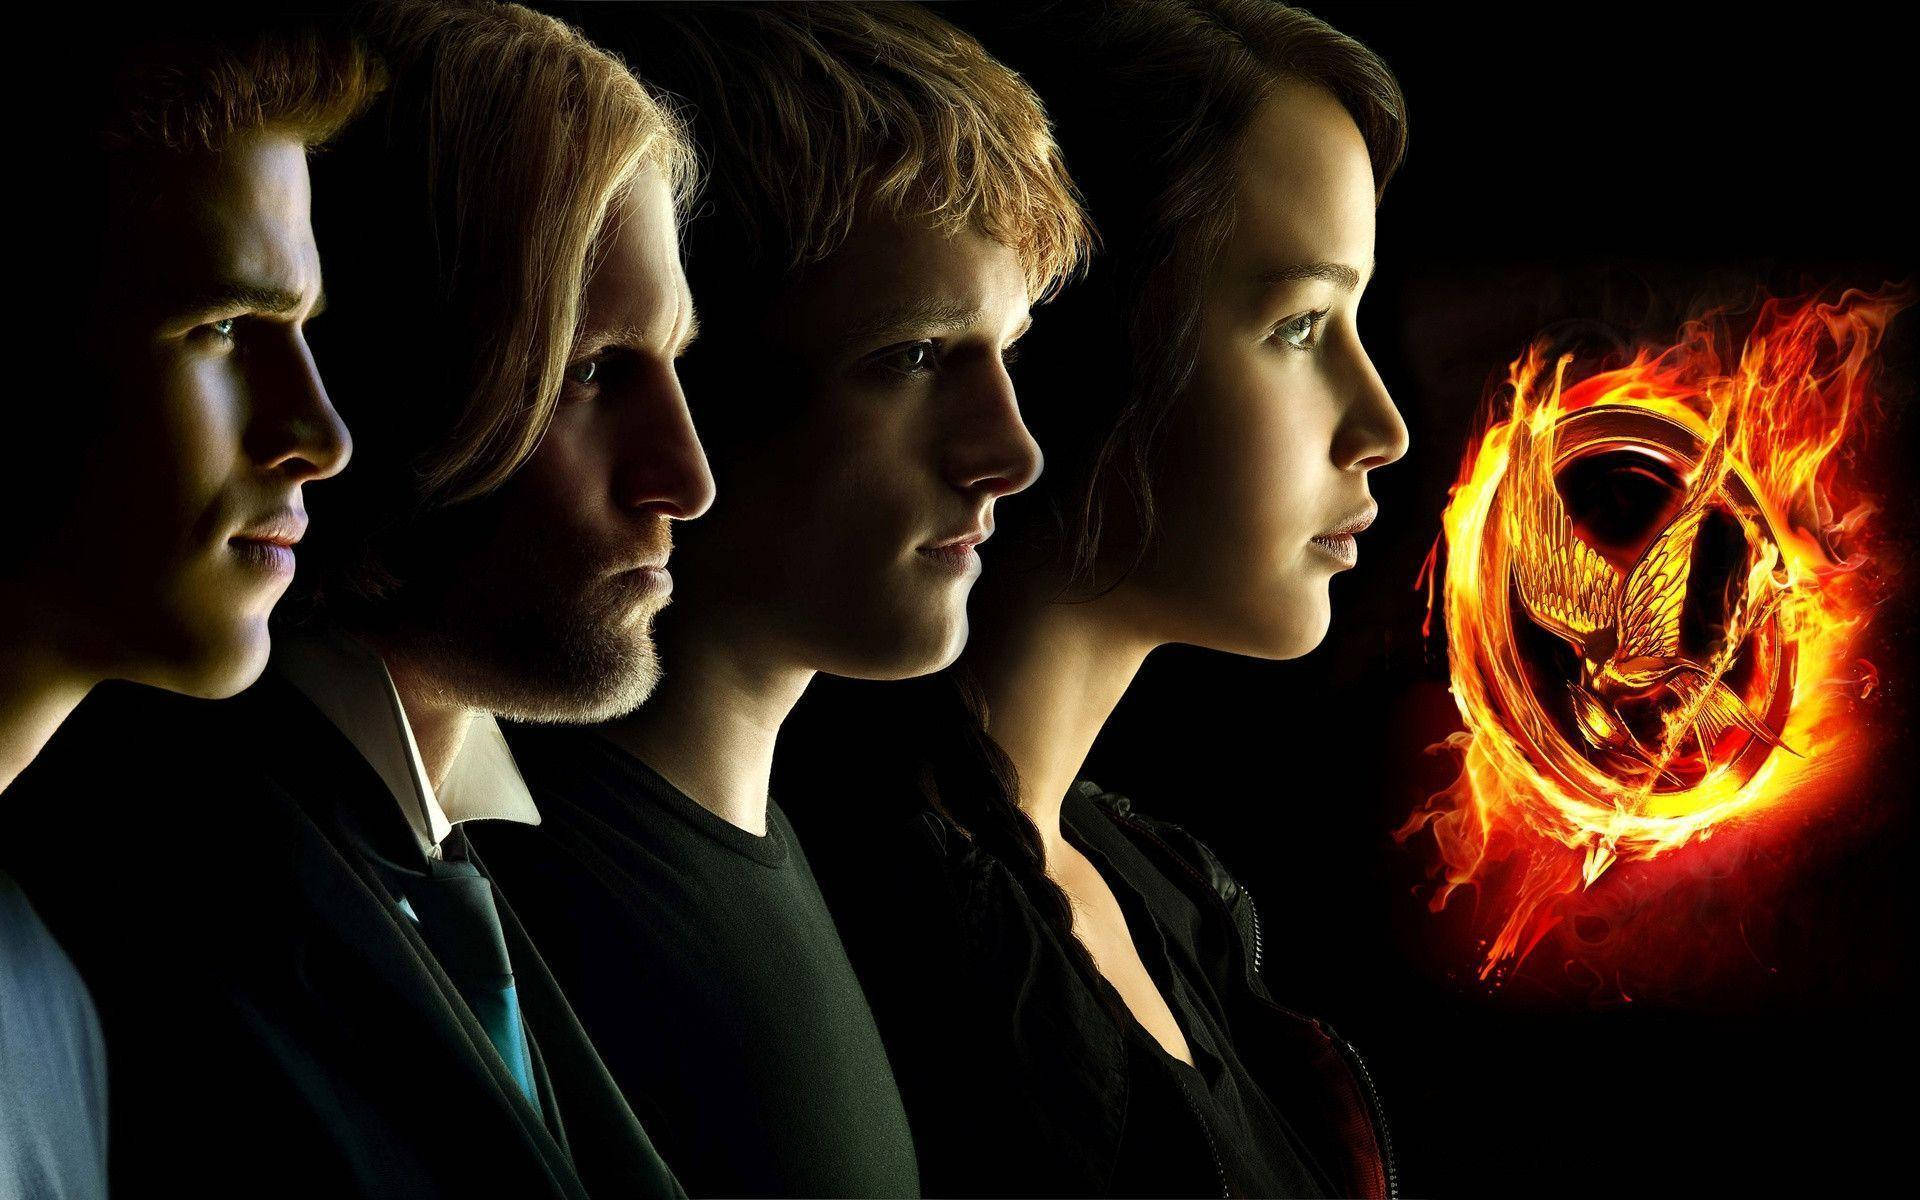 The Hunger Games Group Photo Wallpaper